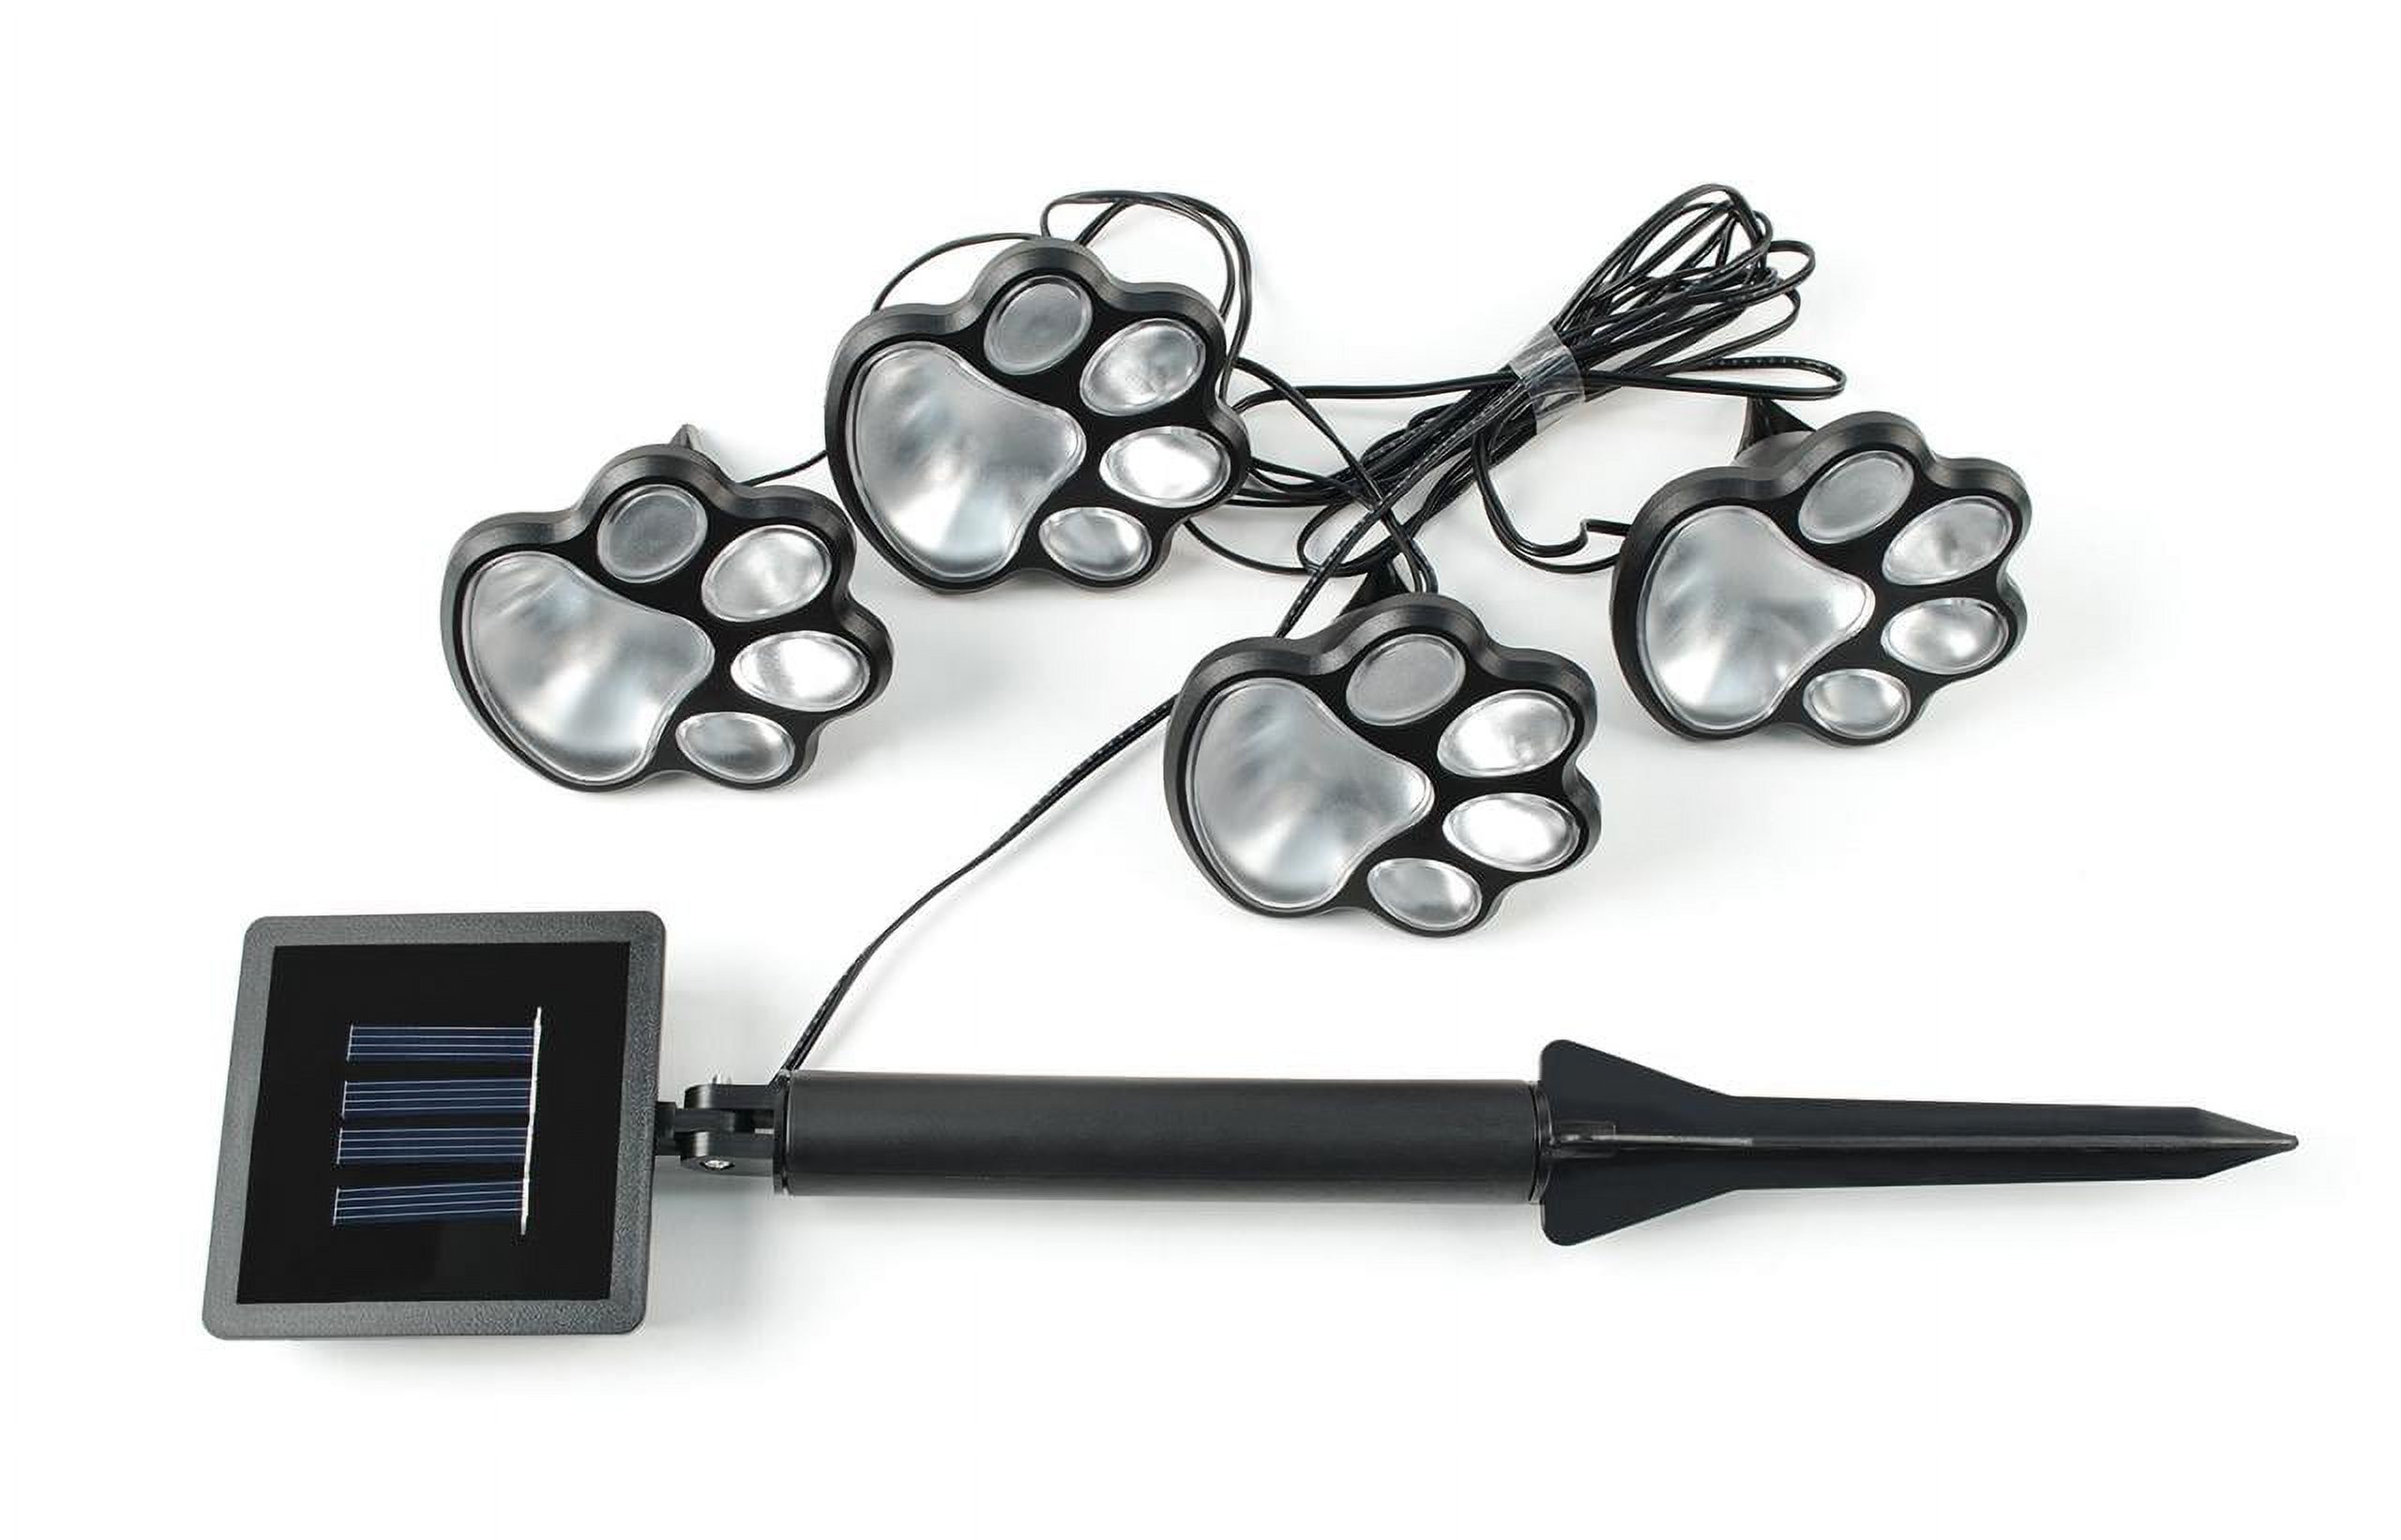 Ideaworks JB7356 Dog Paw Solar Lights Outdoor Panels - Bright Energy Efficient and Perfect for your Garden - 4 pc Set, Black - image 1 of 4